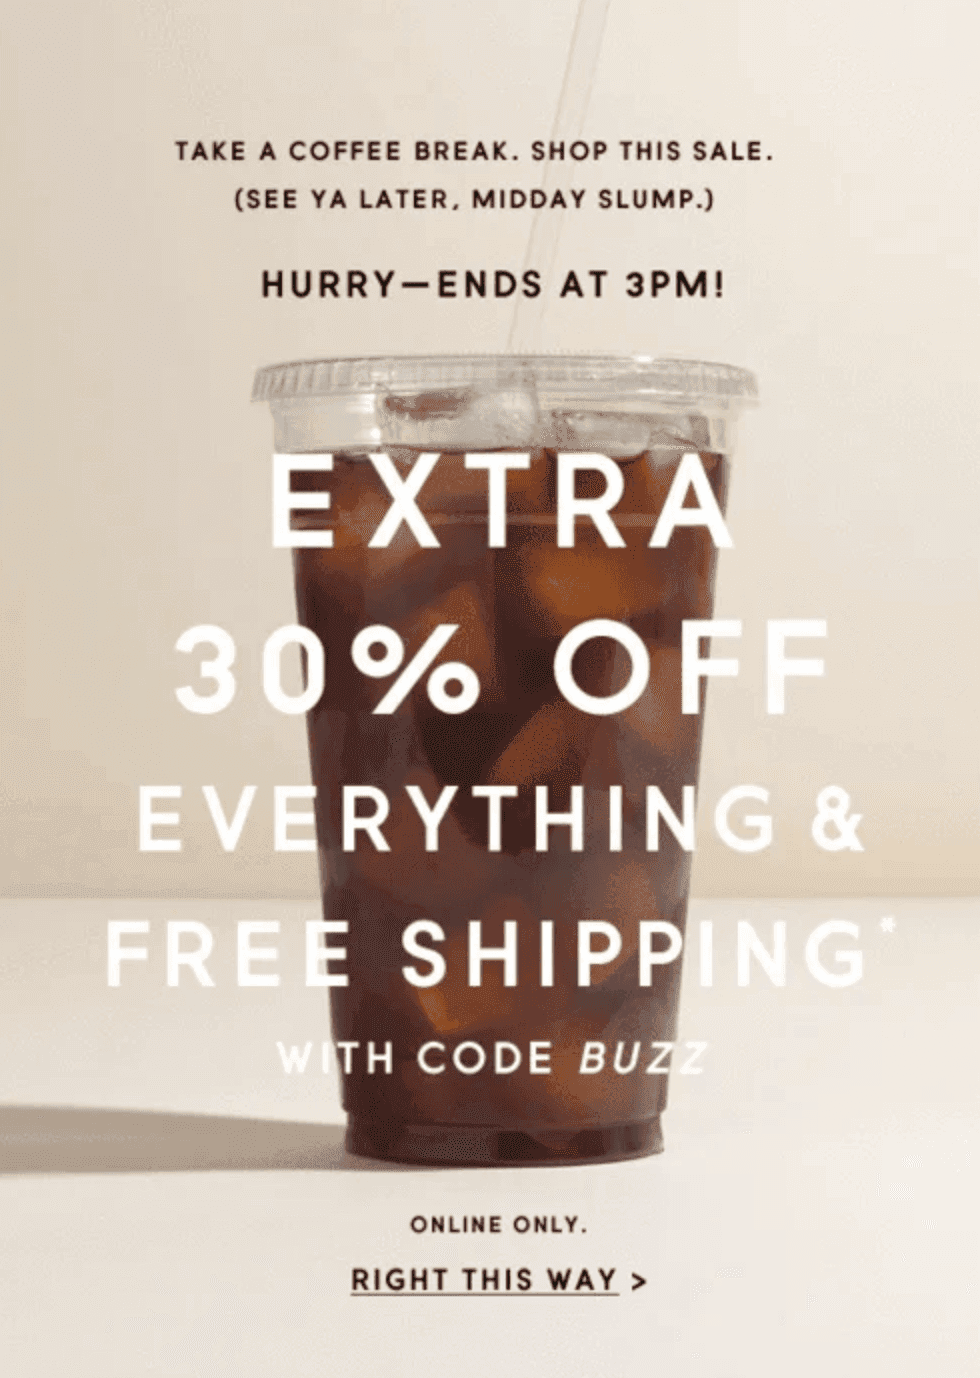 J Crew flash sale - extra 30% off everything and free shipping with code Buzz